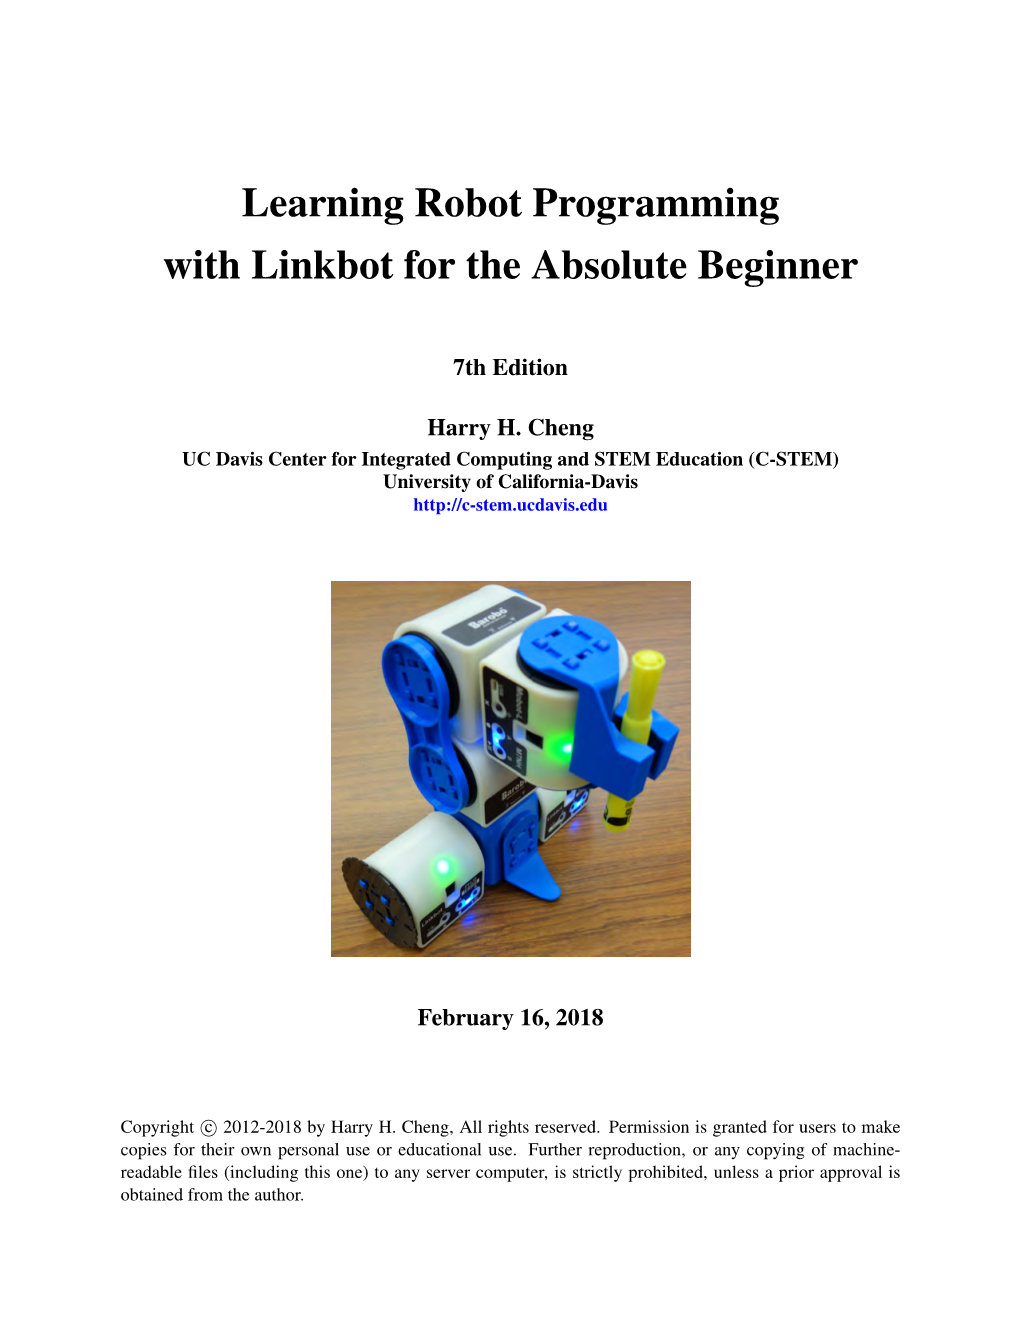 Learning Robot Programming with Linkbot for the Absolute Beginner